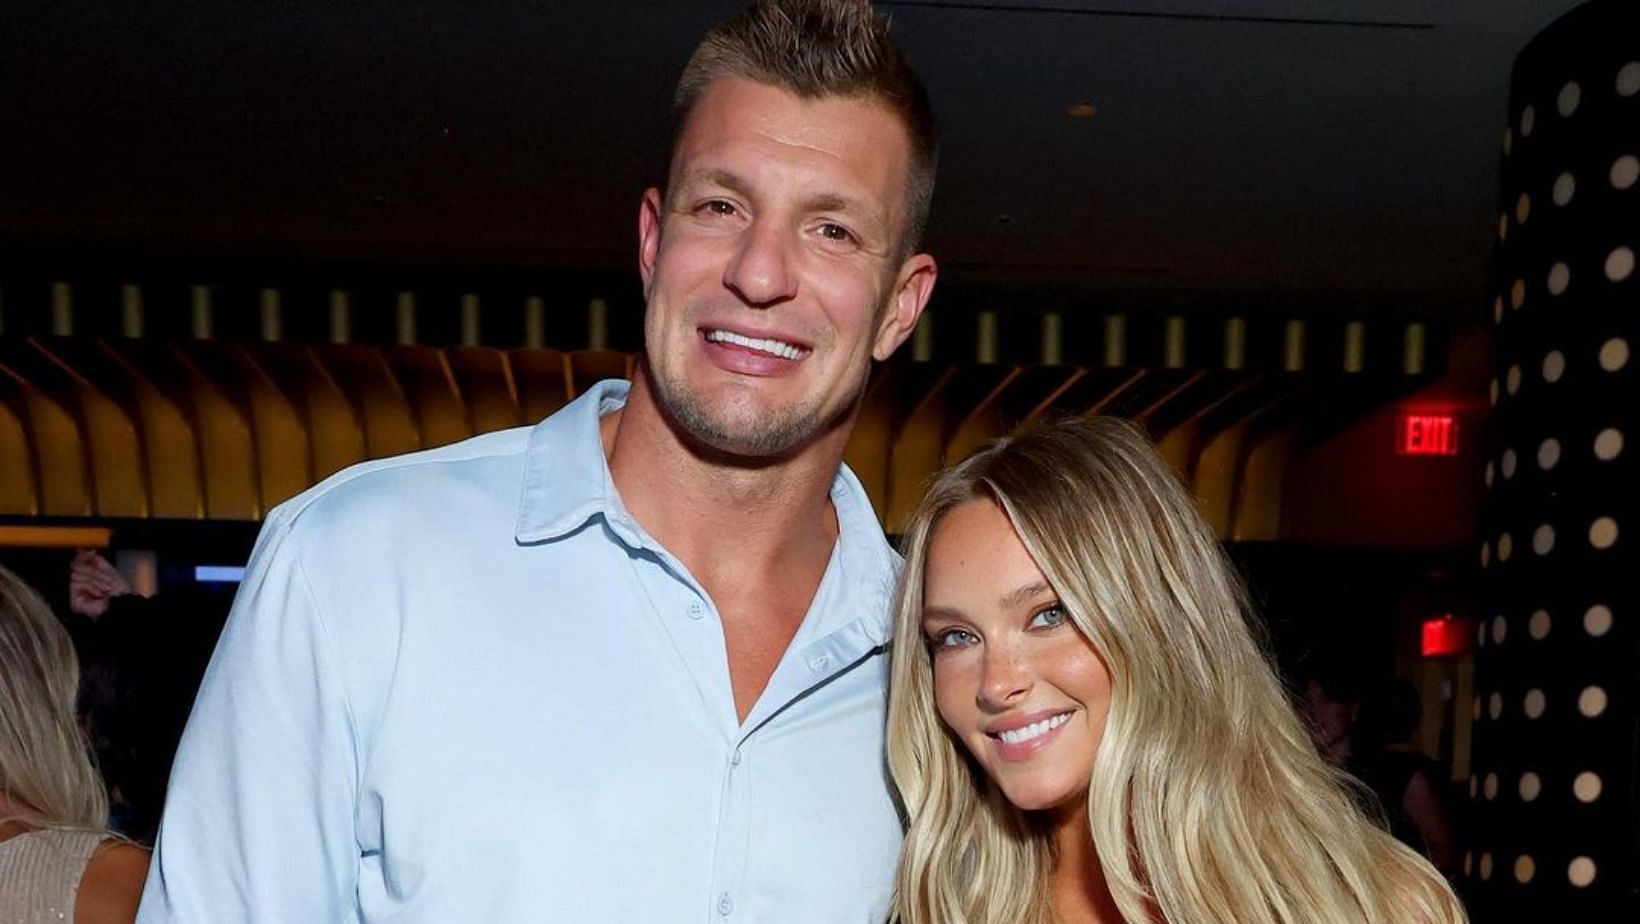 IN PHOTOS: Rob Gronkowski and girlfriend Camille Kostek enjoy day out in sunny LA